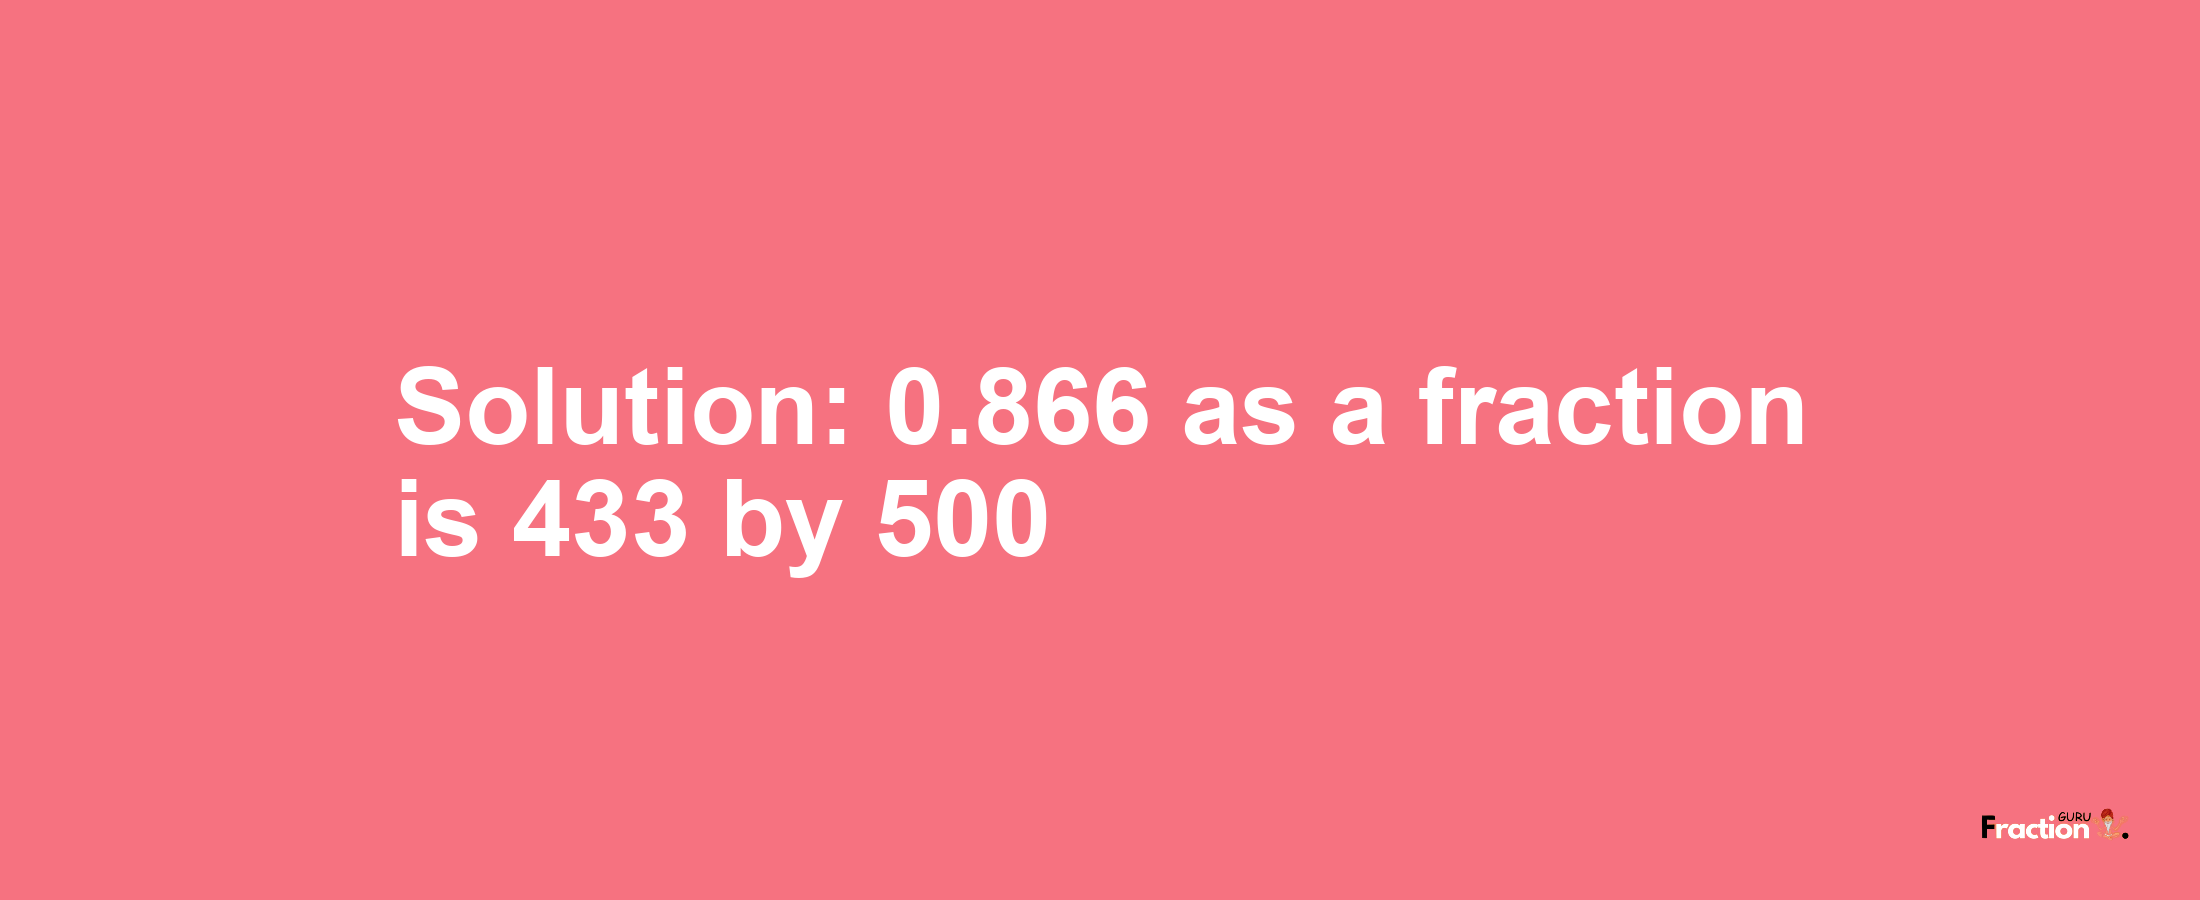 Solution:0.866 as a fraction is 433/500